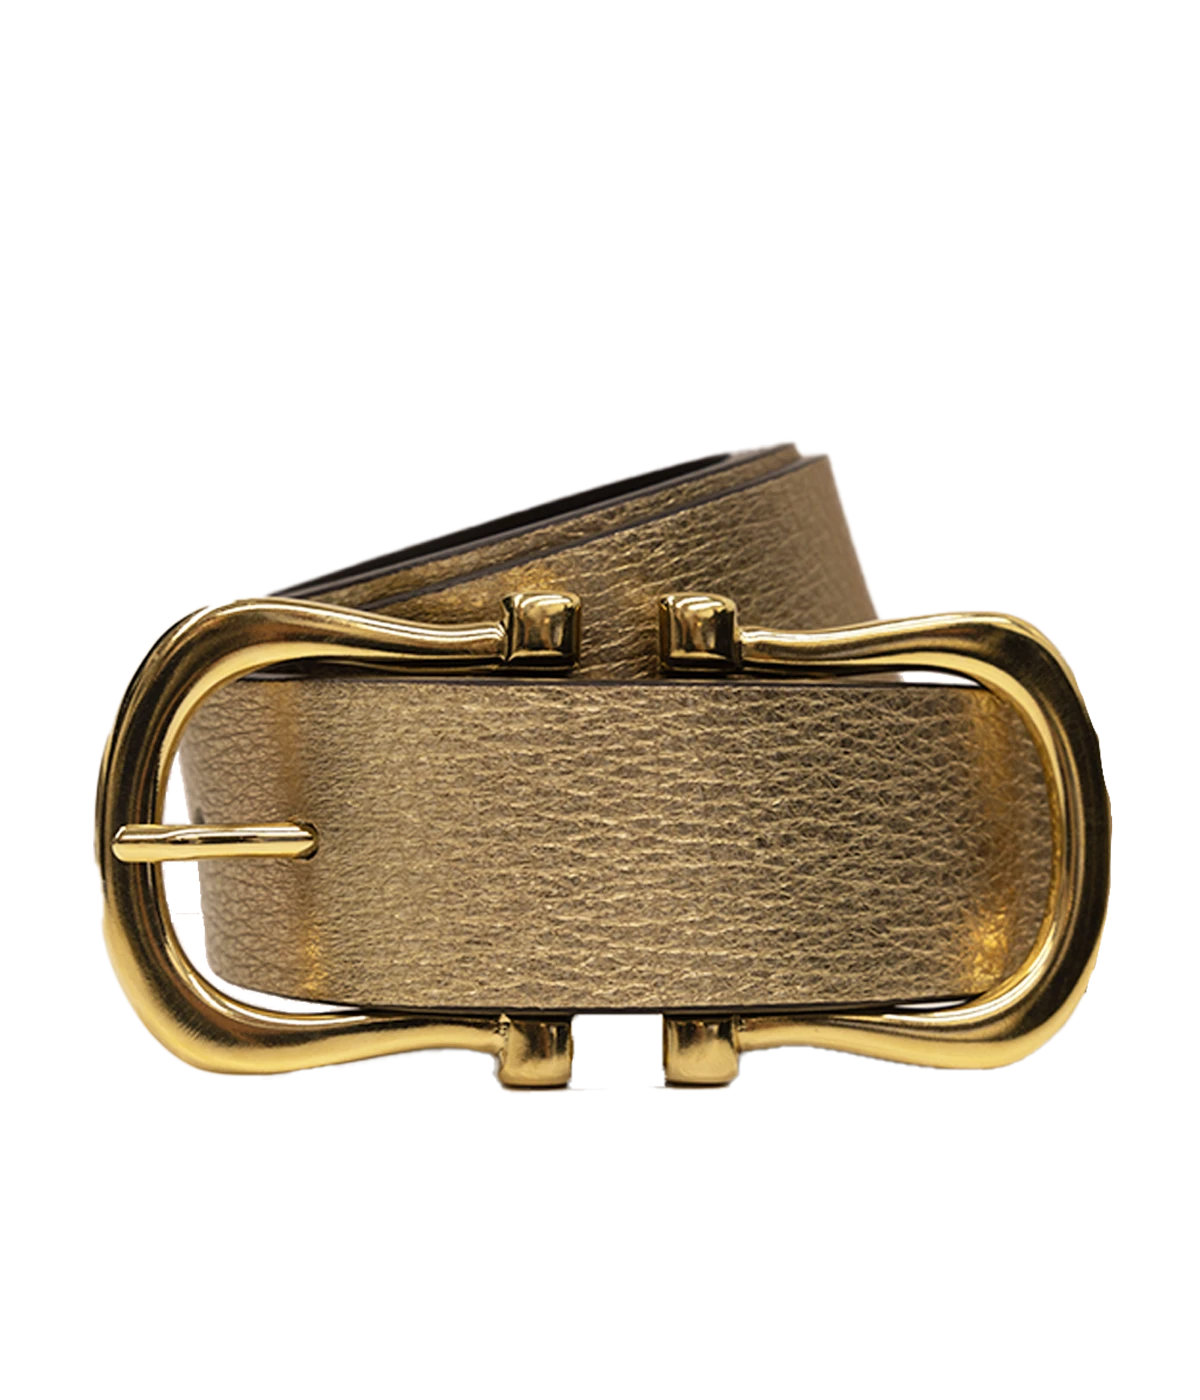 Nicky Gold X Belt in Gold Pebble